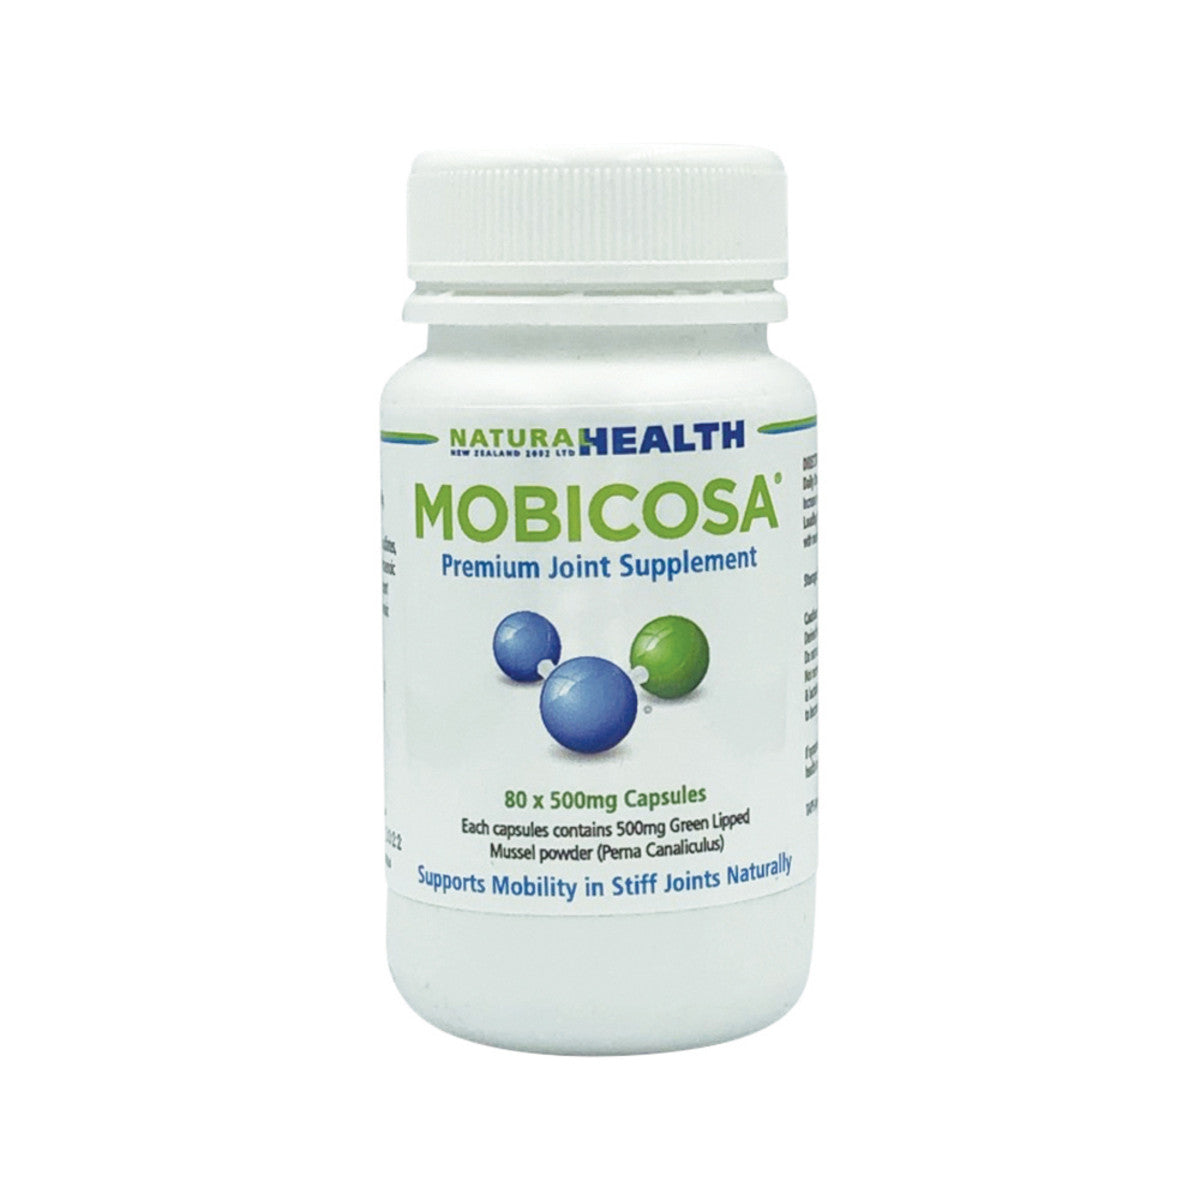 Natural Health - Mobicosa (Premium Joint Supplement)